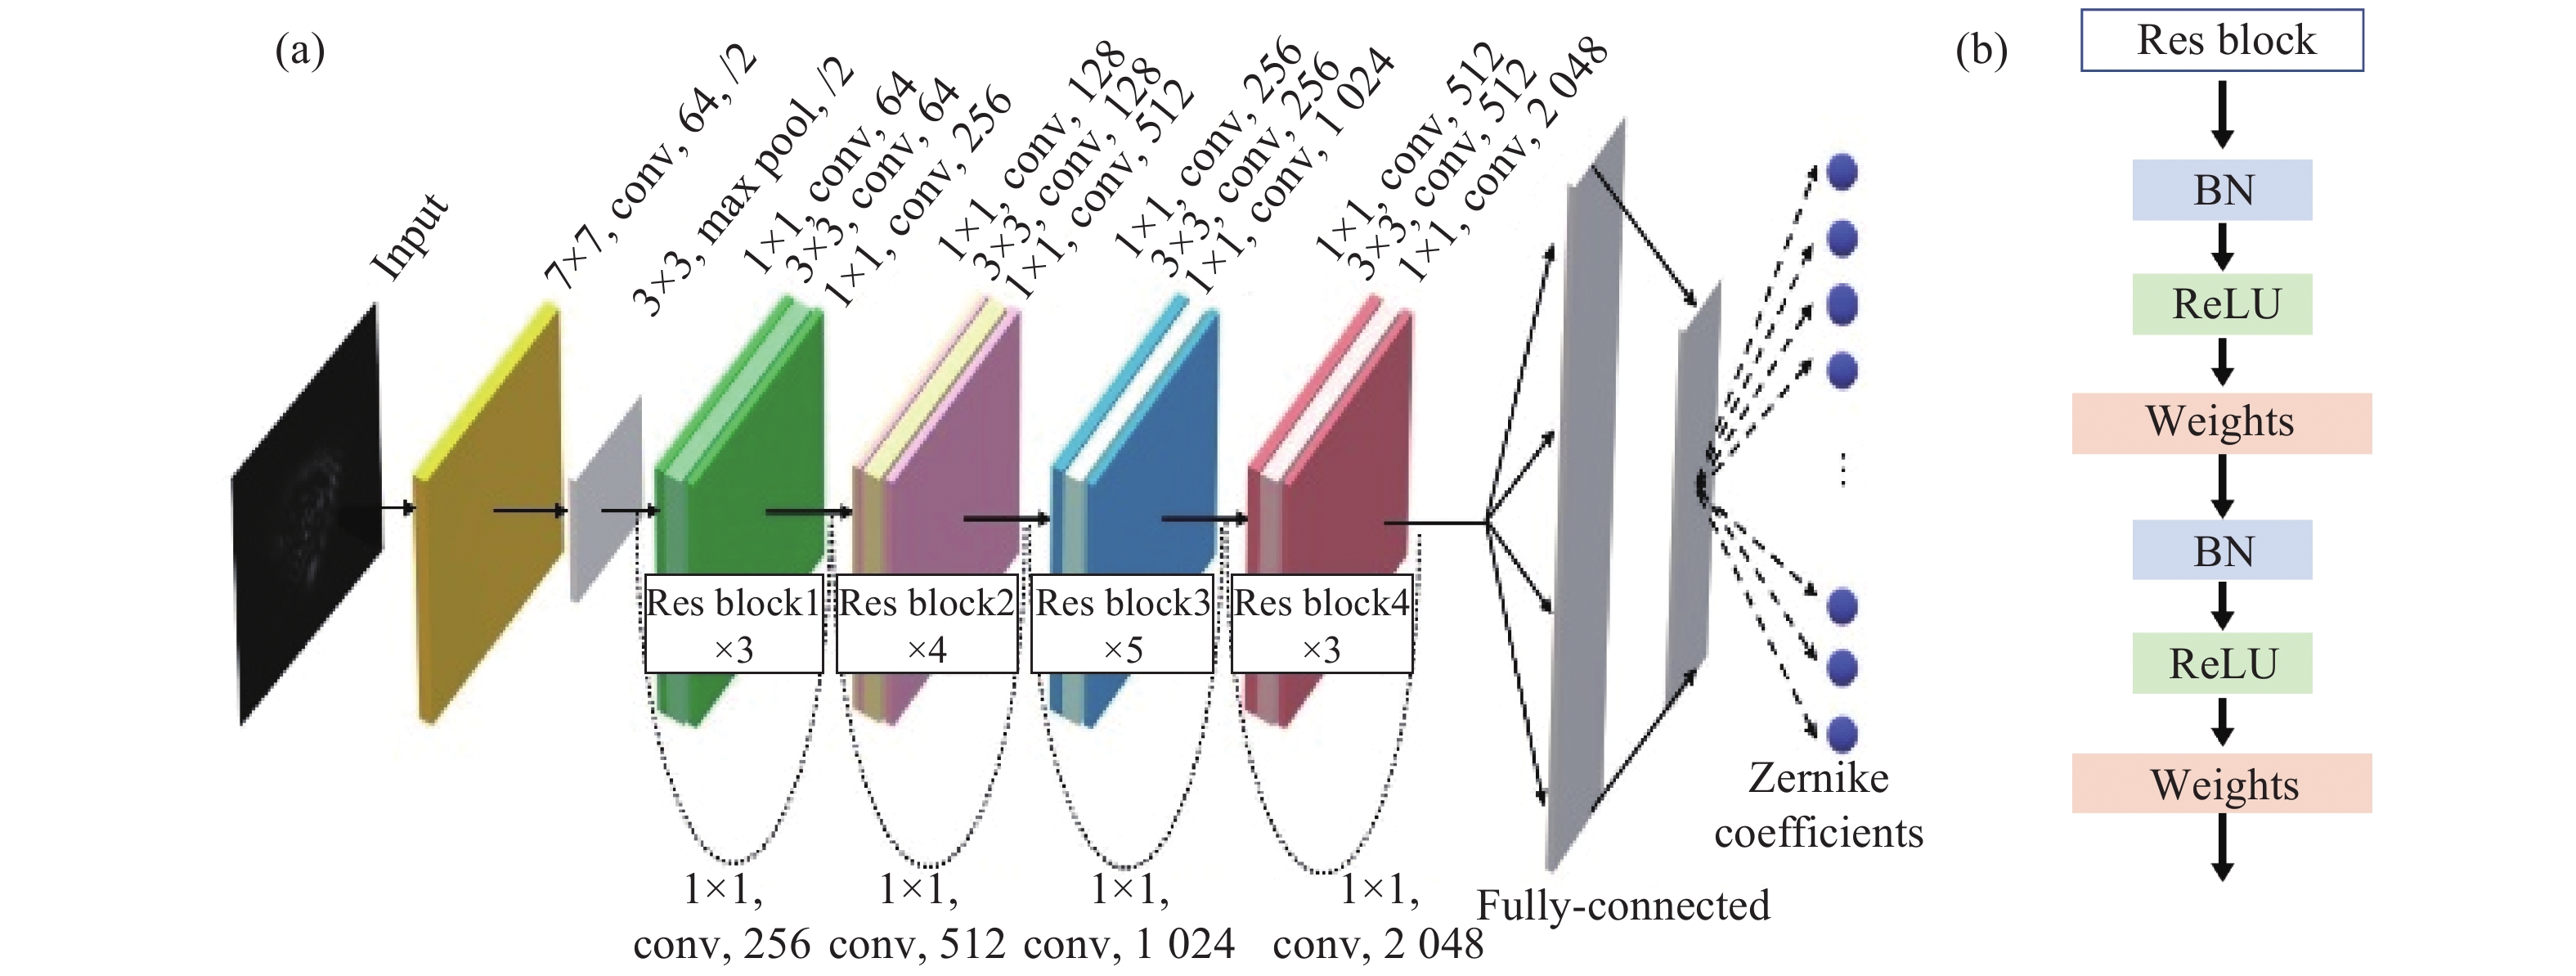 ResNet-50 architecture to estimate Zernike coefficients. (a) Composition of the network; (b) Structure of residual block